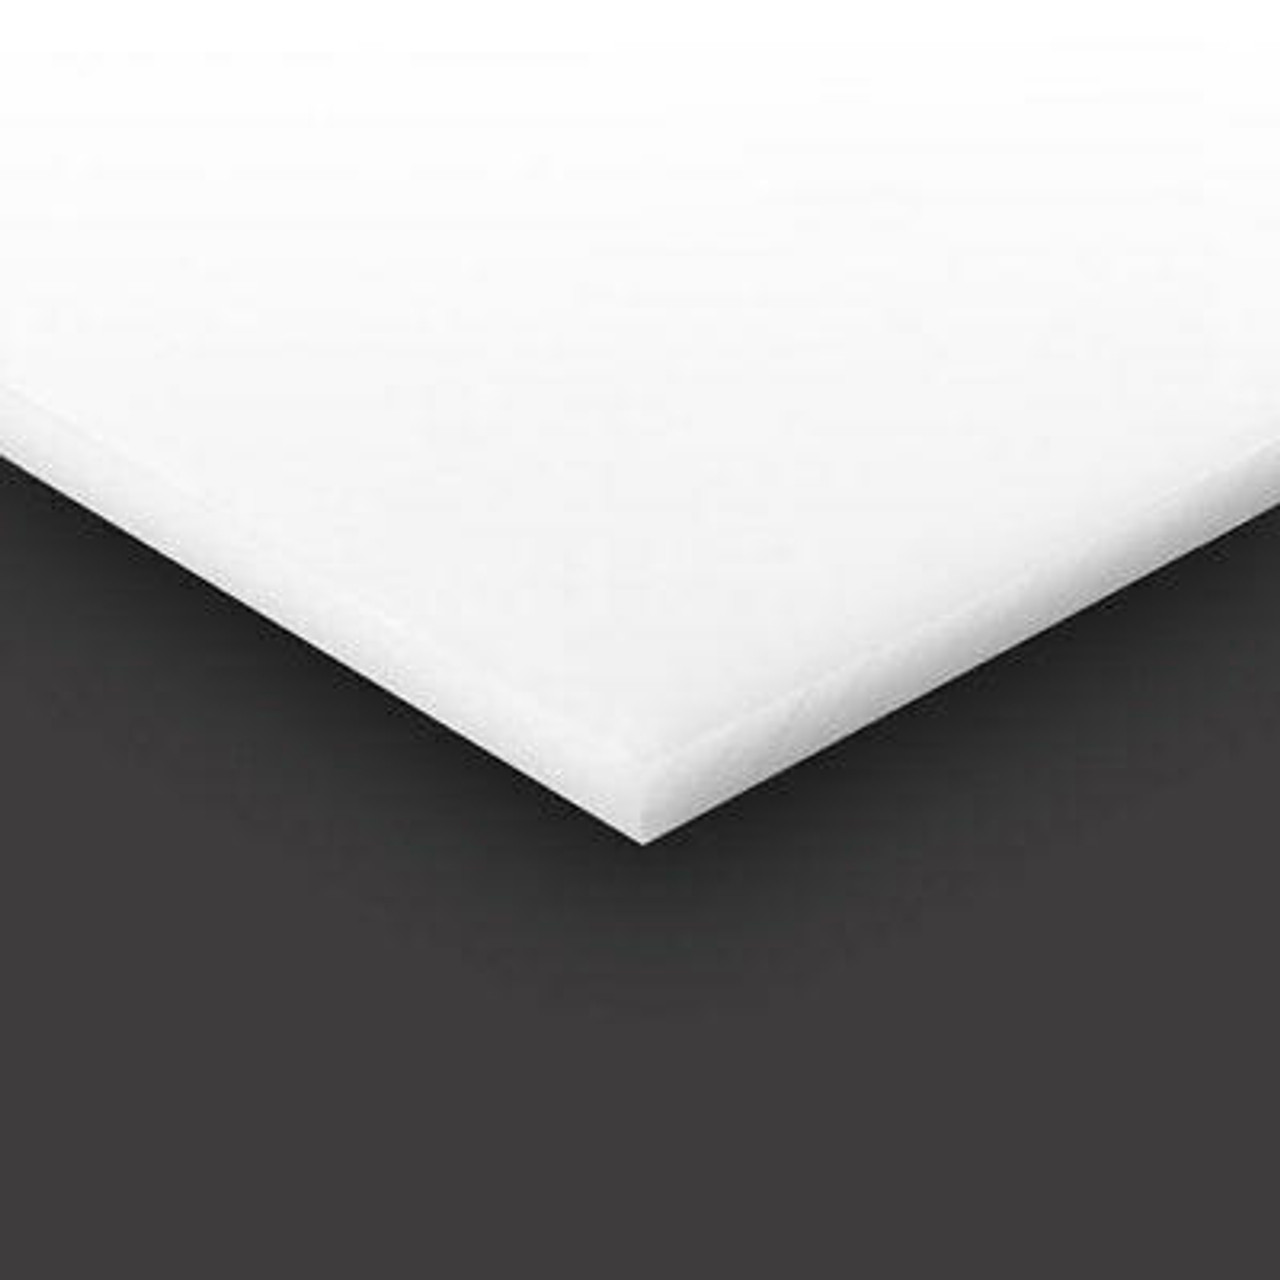 Top-rated And Dependable Styrofoam Board Plastic Sheet 